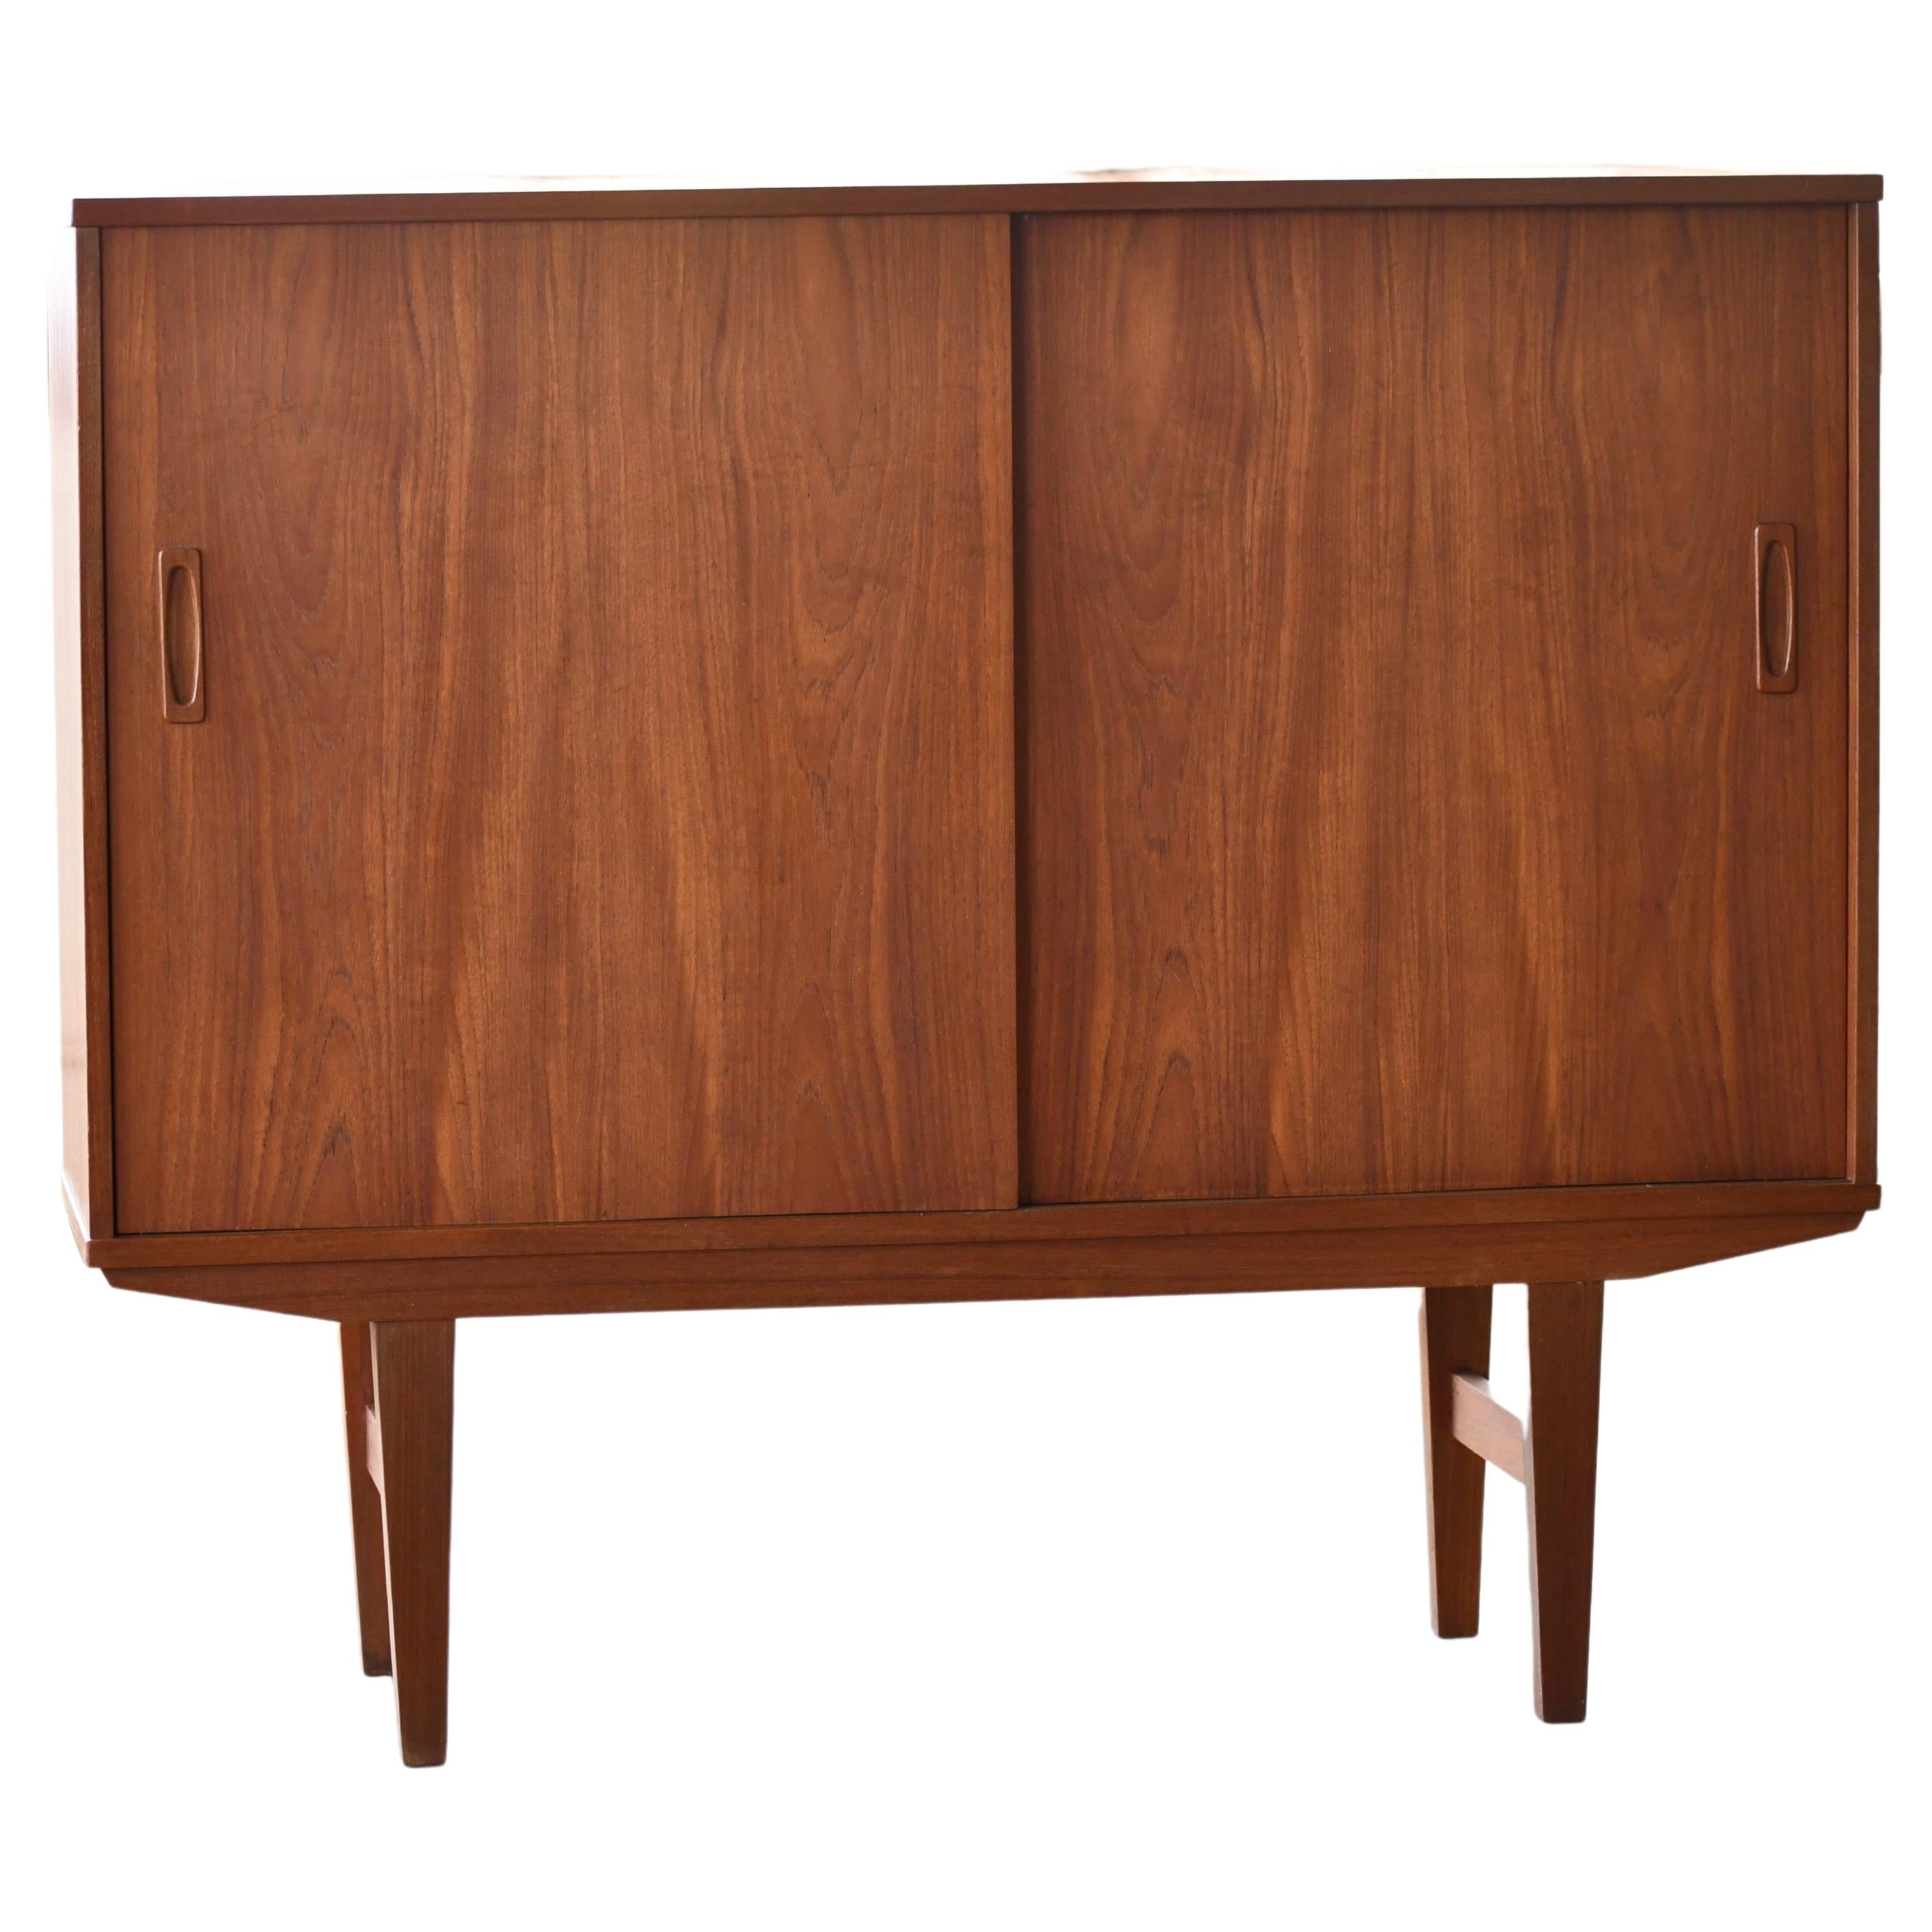 Danish 1960's Small Sideboard or Cabinet in Teak with Built-in-Bar